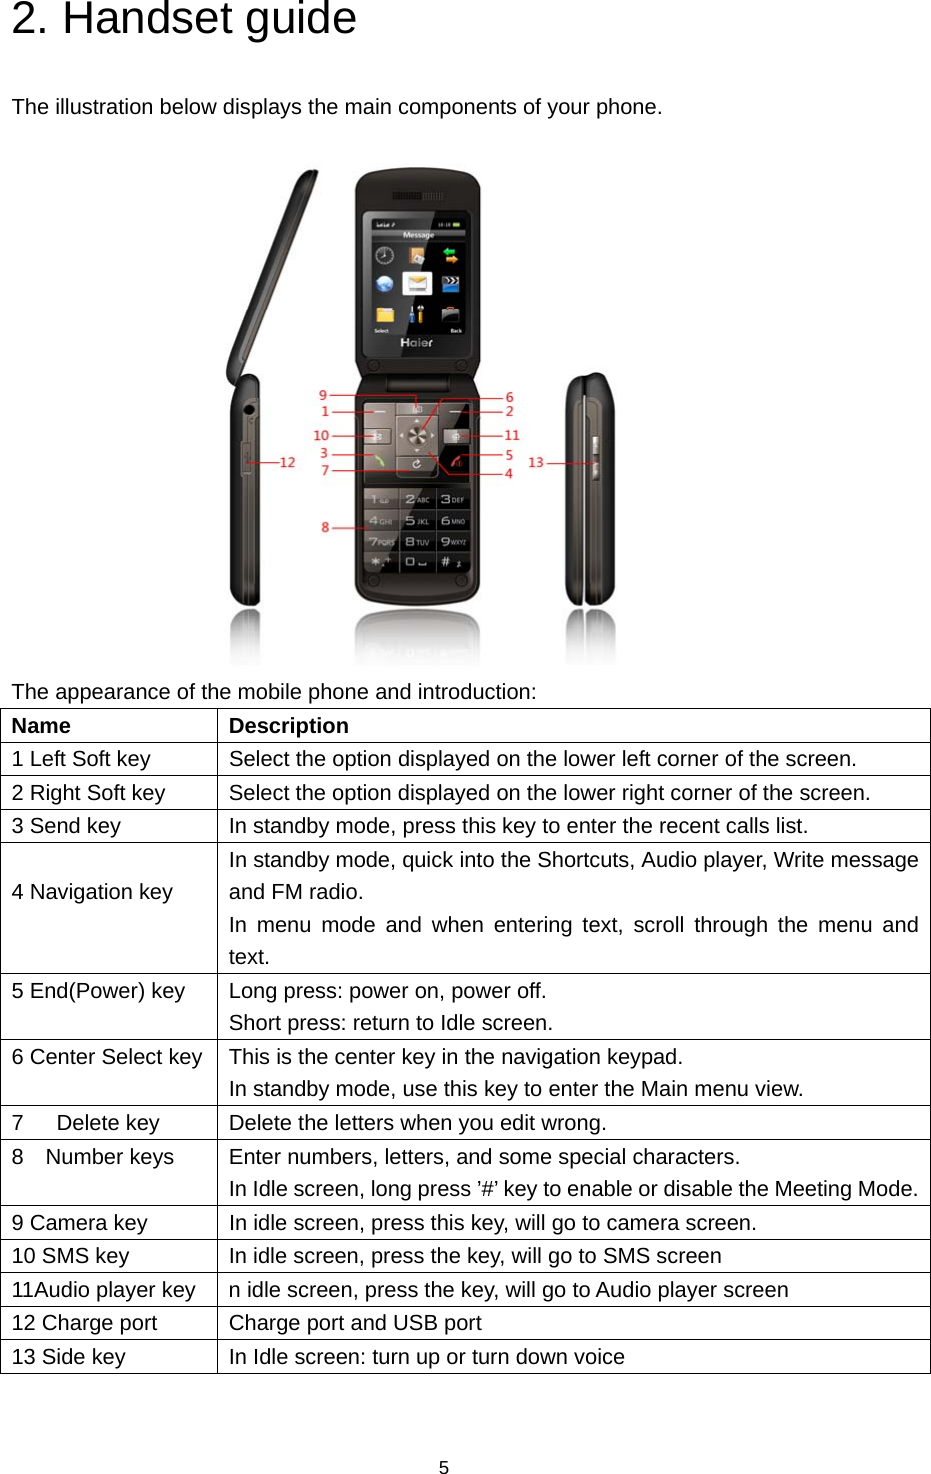 5 2. Handset guide The illustration below displays the main components of your phone.  The appearance of the mobile phone and introduction: Name   Description  1 Left Soft key    Select the option displayed on the lower left corner of the screen. 2 Right Soft key    Select the option displayed on the lower right corner of the screen. 3 Send key  In standby mode, press this key to enter the recent calls list.  4 Navigation key In standby mode, quick into the Shortcuts, Audio player, Write message and FM radio. In menu mode and when entering text, scroll through the menu and text. 5 End(Power) key  Long press: power on, power off. Short press: return to Idle screen. 6 Center Select key This is the center key in the navigation keypad.   In standby mode, use this key to enter the Main menu view. 7      Delete key  Delete the letters when you edit wrong. 8    Number keys  Enter numbers, letters, and some special characters. In Idle screen, long press ’#’ key to enable or disable the Meeting Mode.9 Camera key  In idle screen, press this key, will go to camera screen. 10 SMS key  In idle screen, press the key, will go to SMS screen 11Audio player key  n idle screen, press the key, will go to Audio player screen 12 Charge port  Charge port and USB port 13 Side key  In Idle screen: turn up or turn down voice  